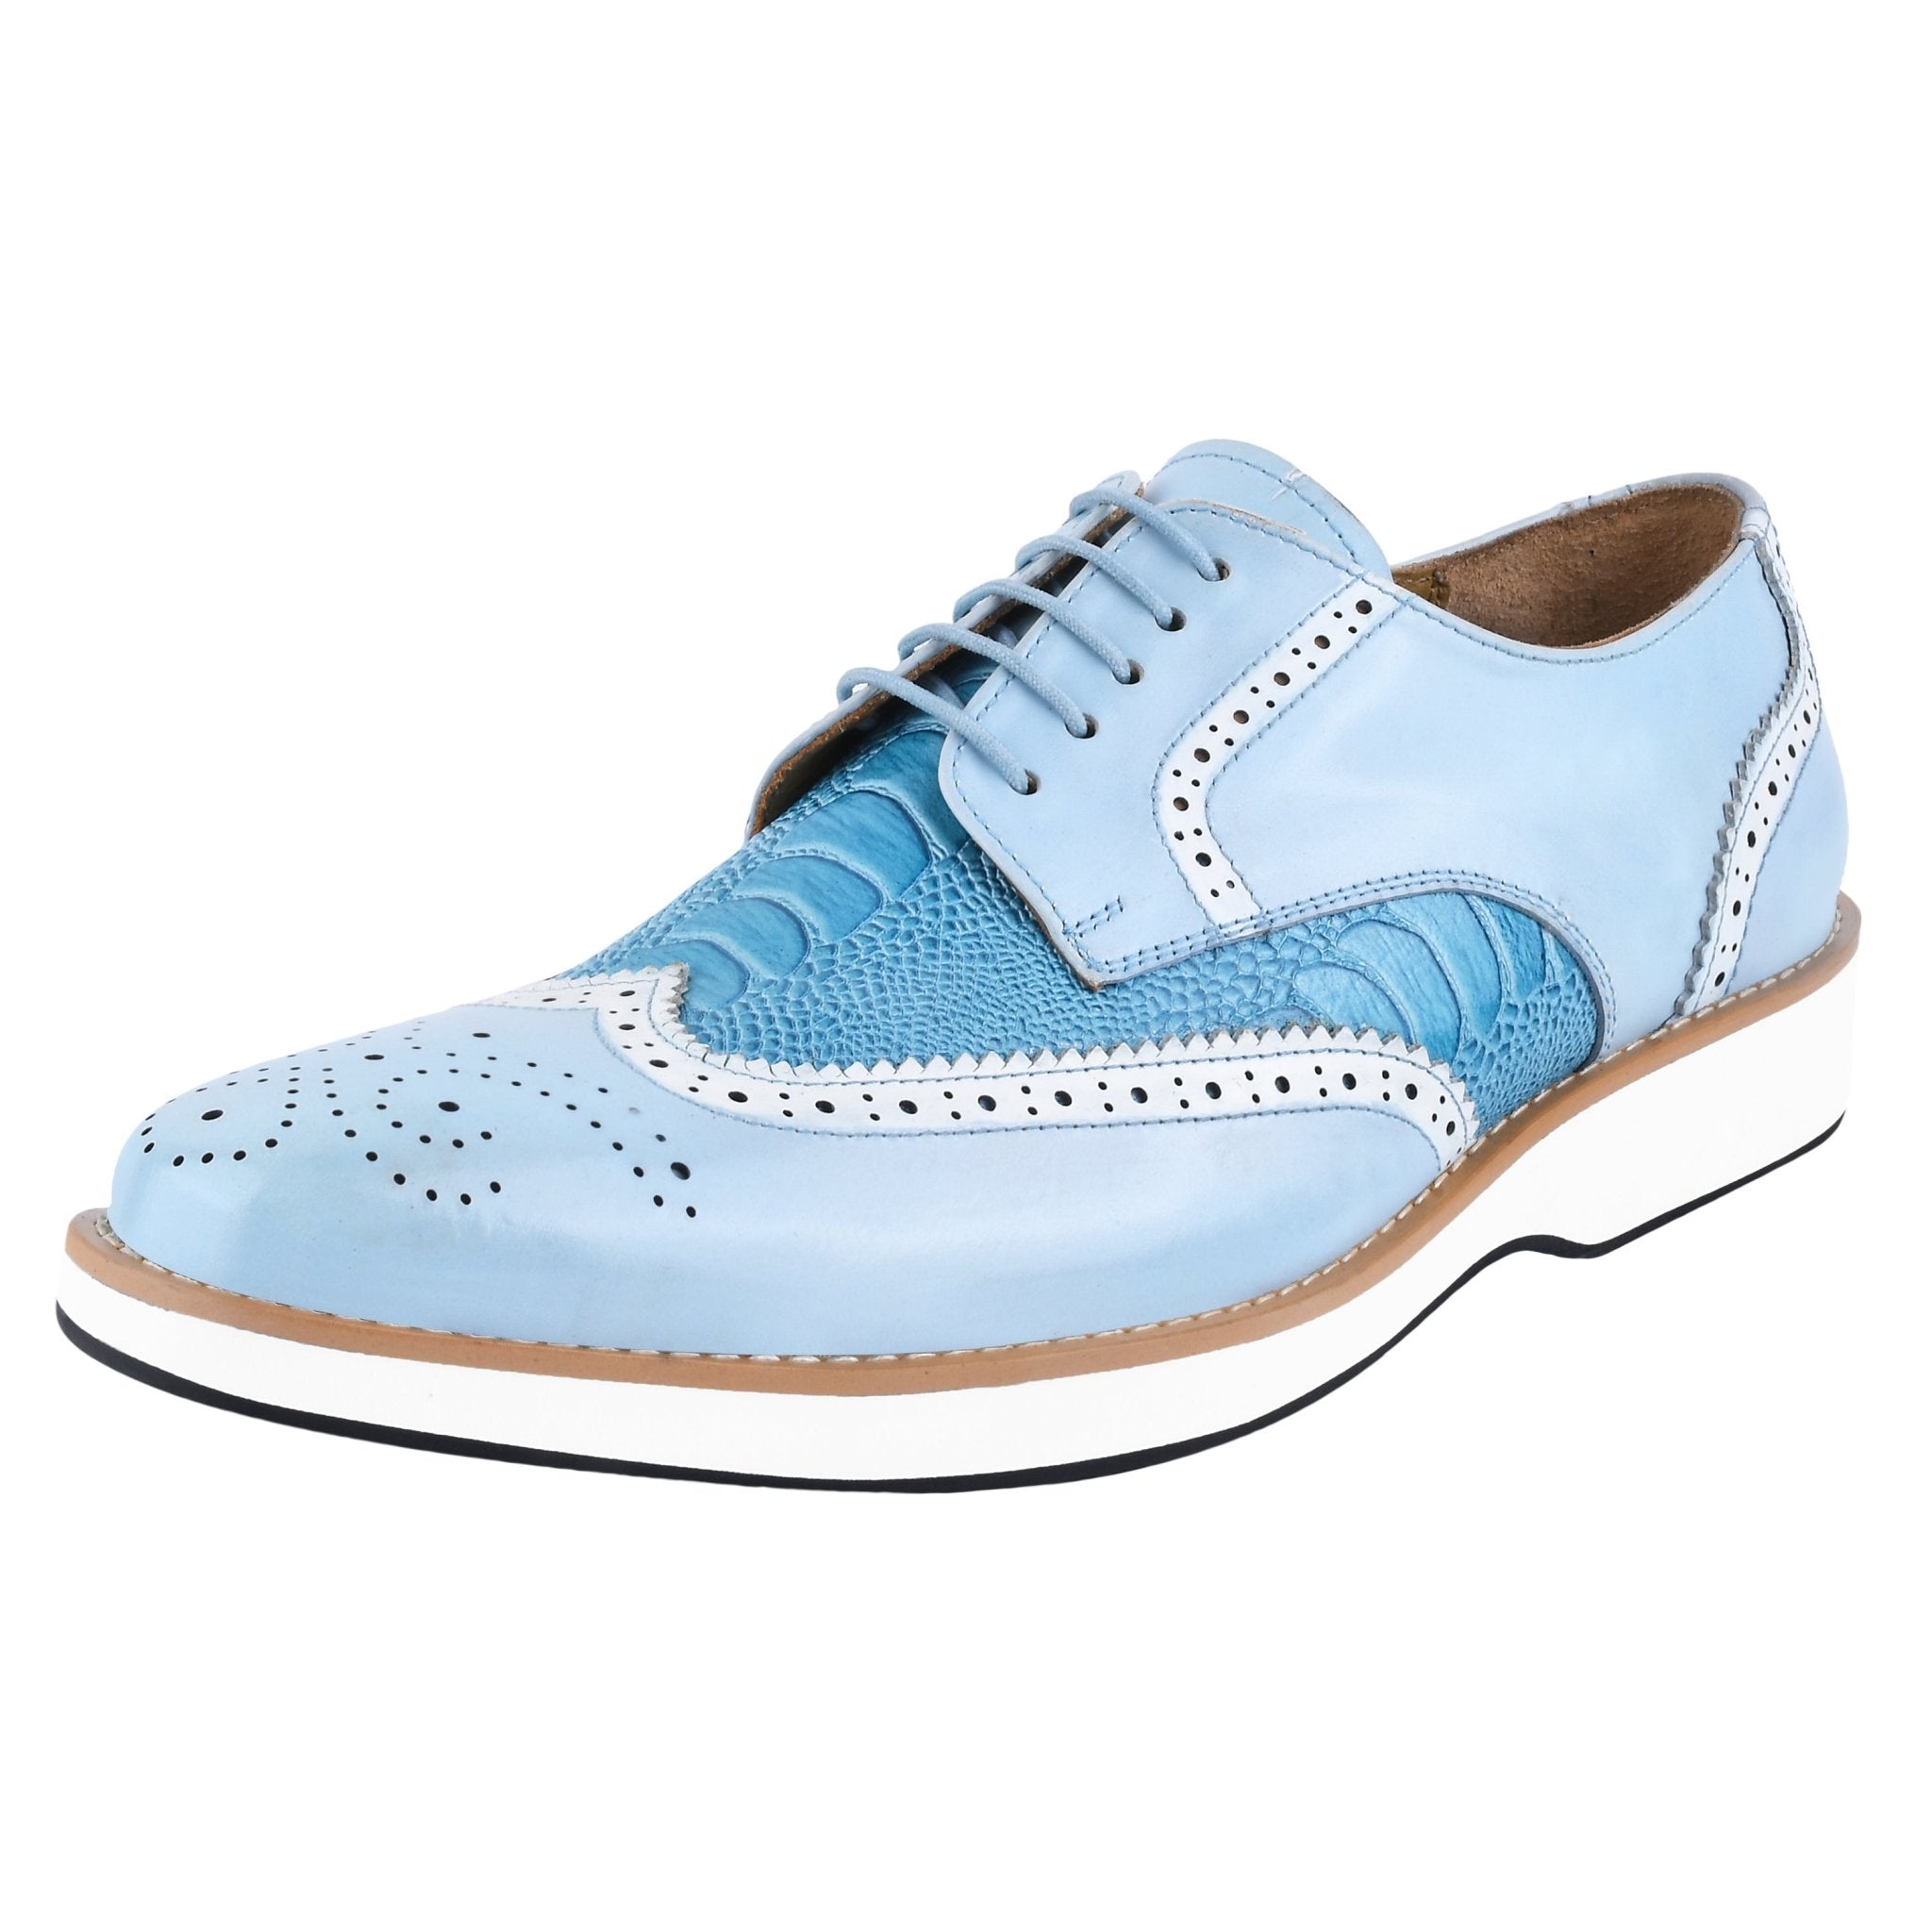 Roy Ostrich Leather Perforated toe Casual Oxford Dress Shoes